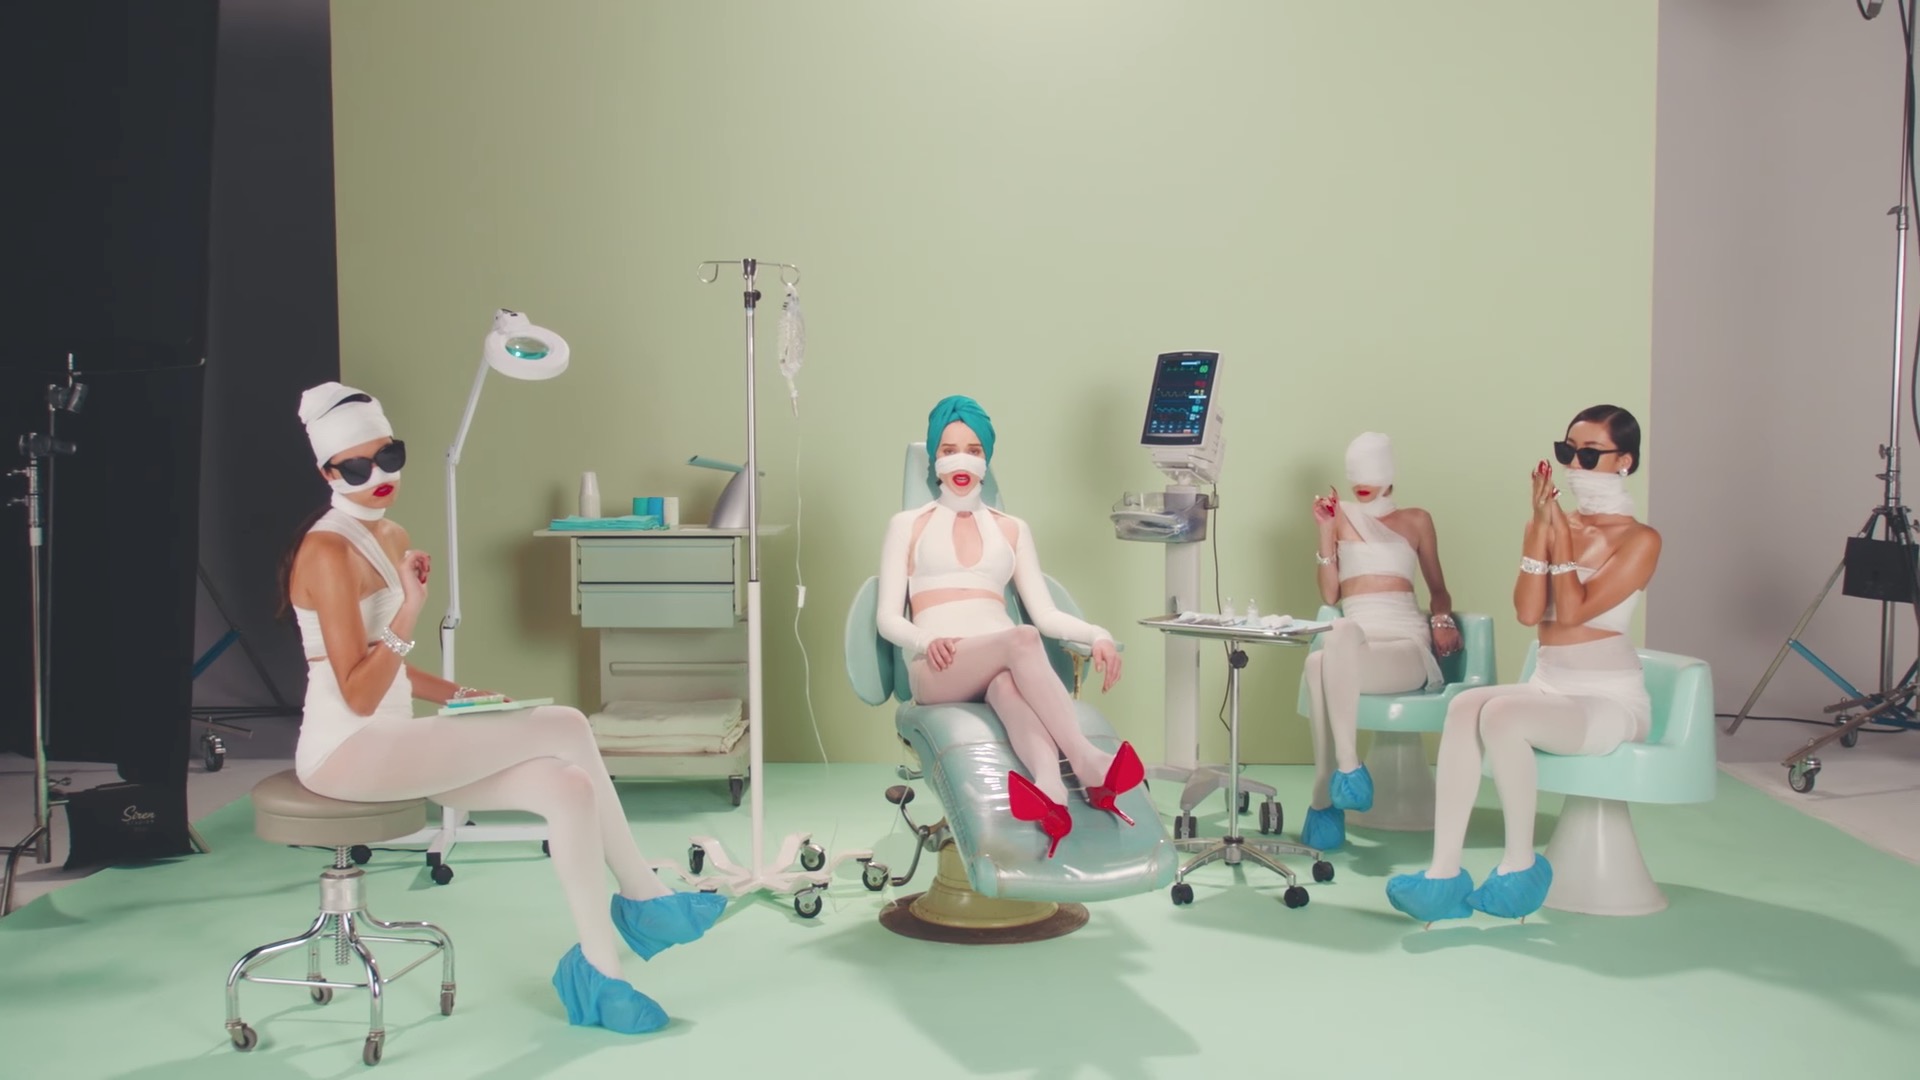 st vincent new los ageless music video